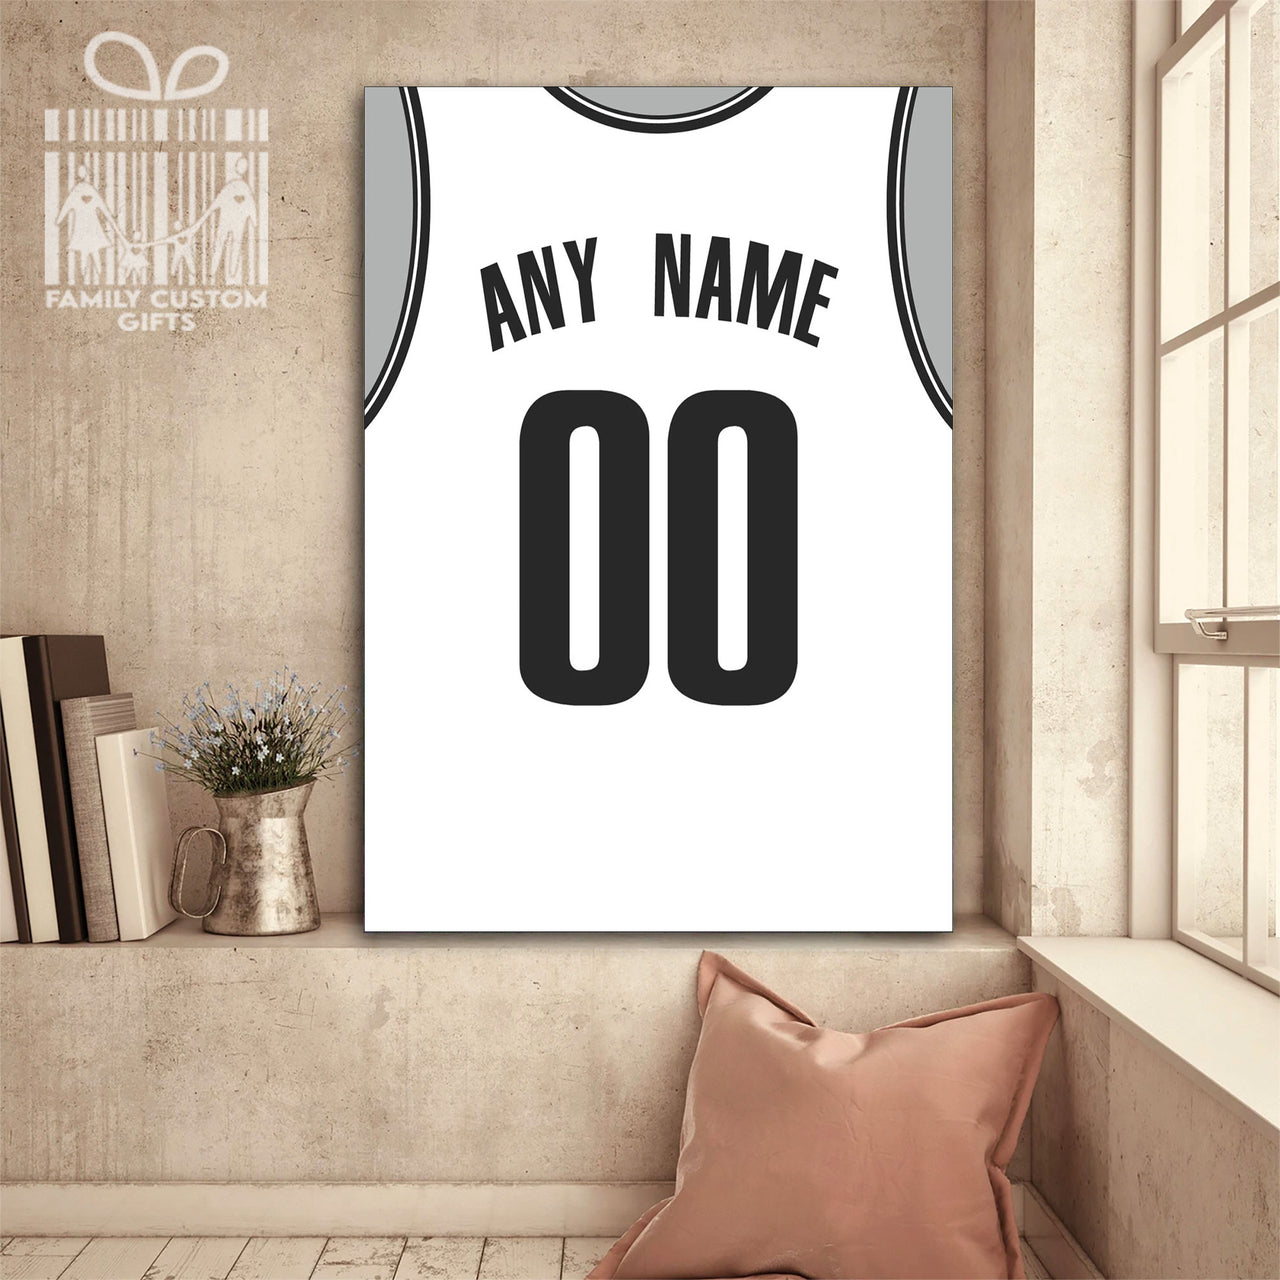 Basketball Jersey Personalized Throw Pillow